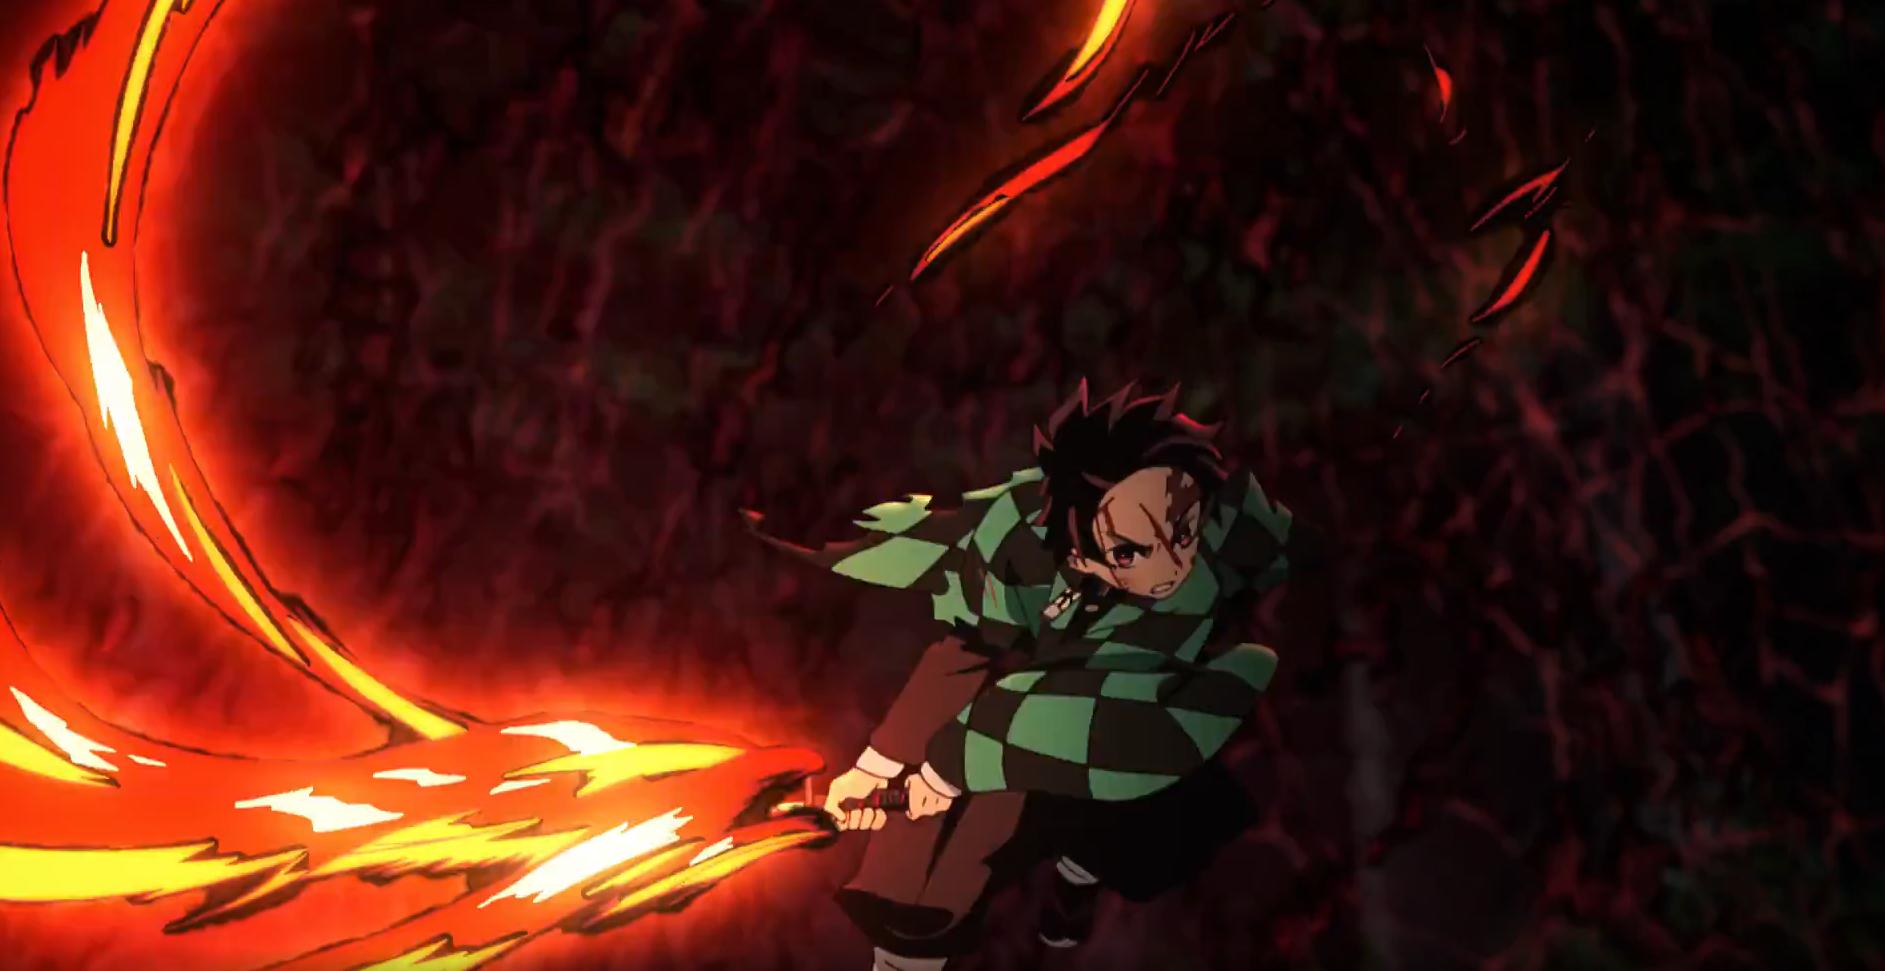 Jose C. Martinez on X: Holy fuck episode 19 of Demon Slayer: Kimetsu no  Yaiba was so fucking Epic. The bar got set high and their damn delivered  as well. I want